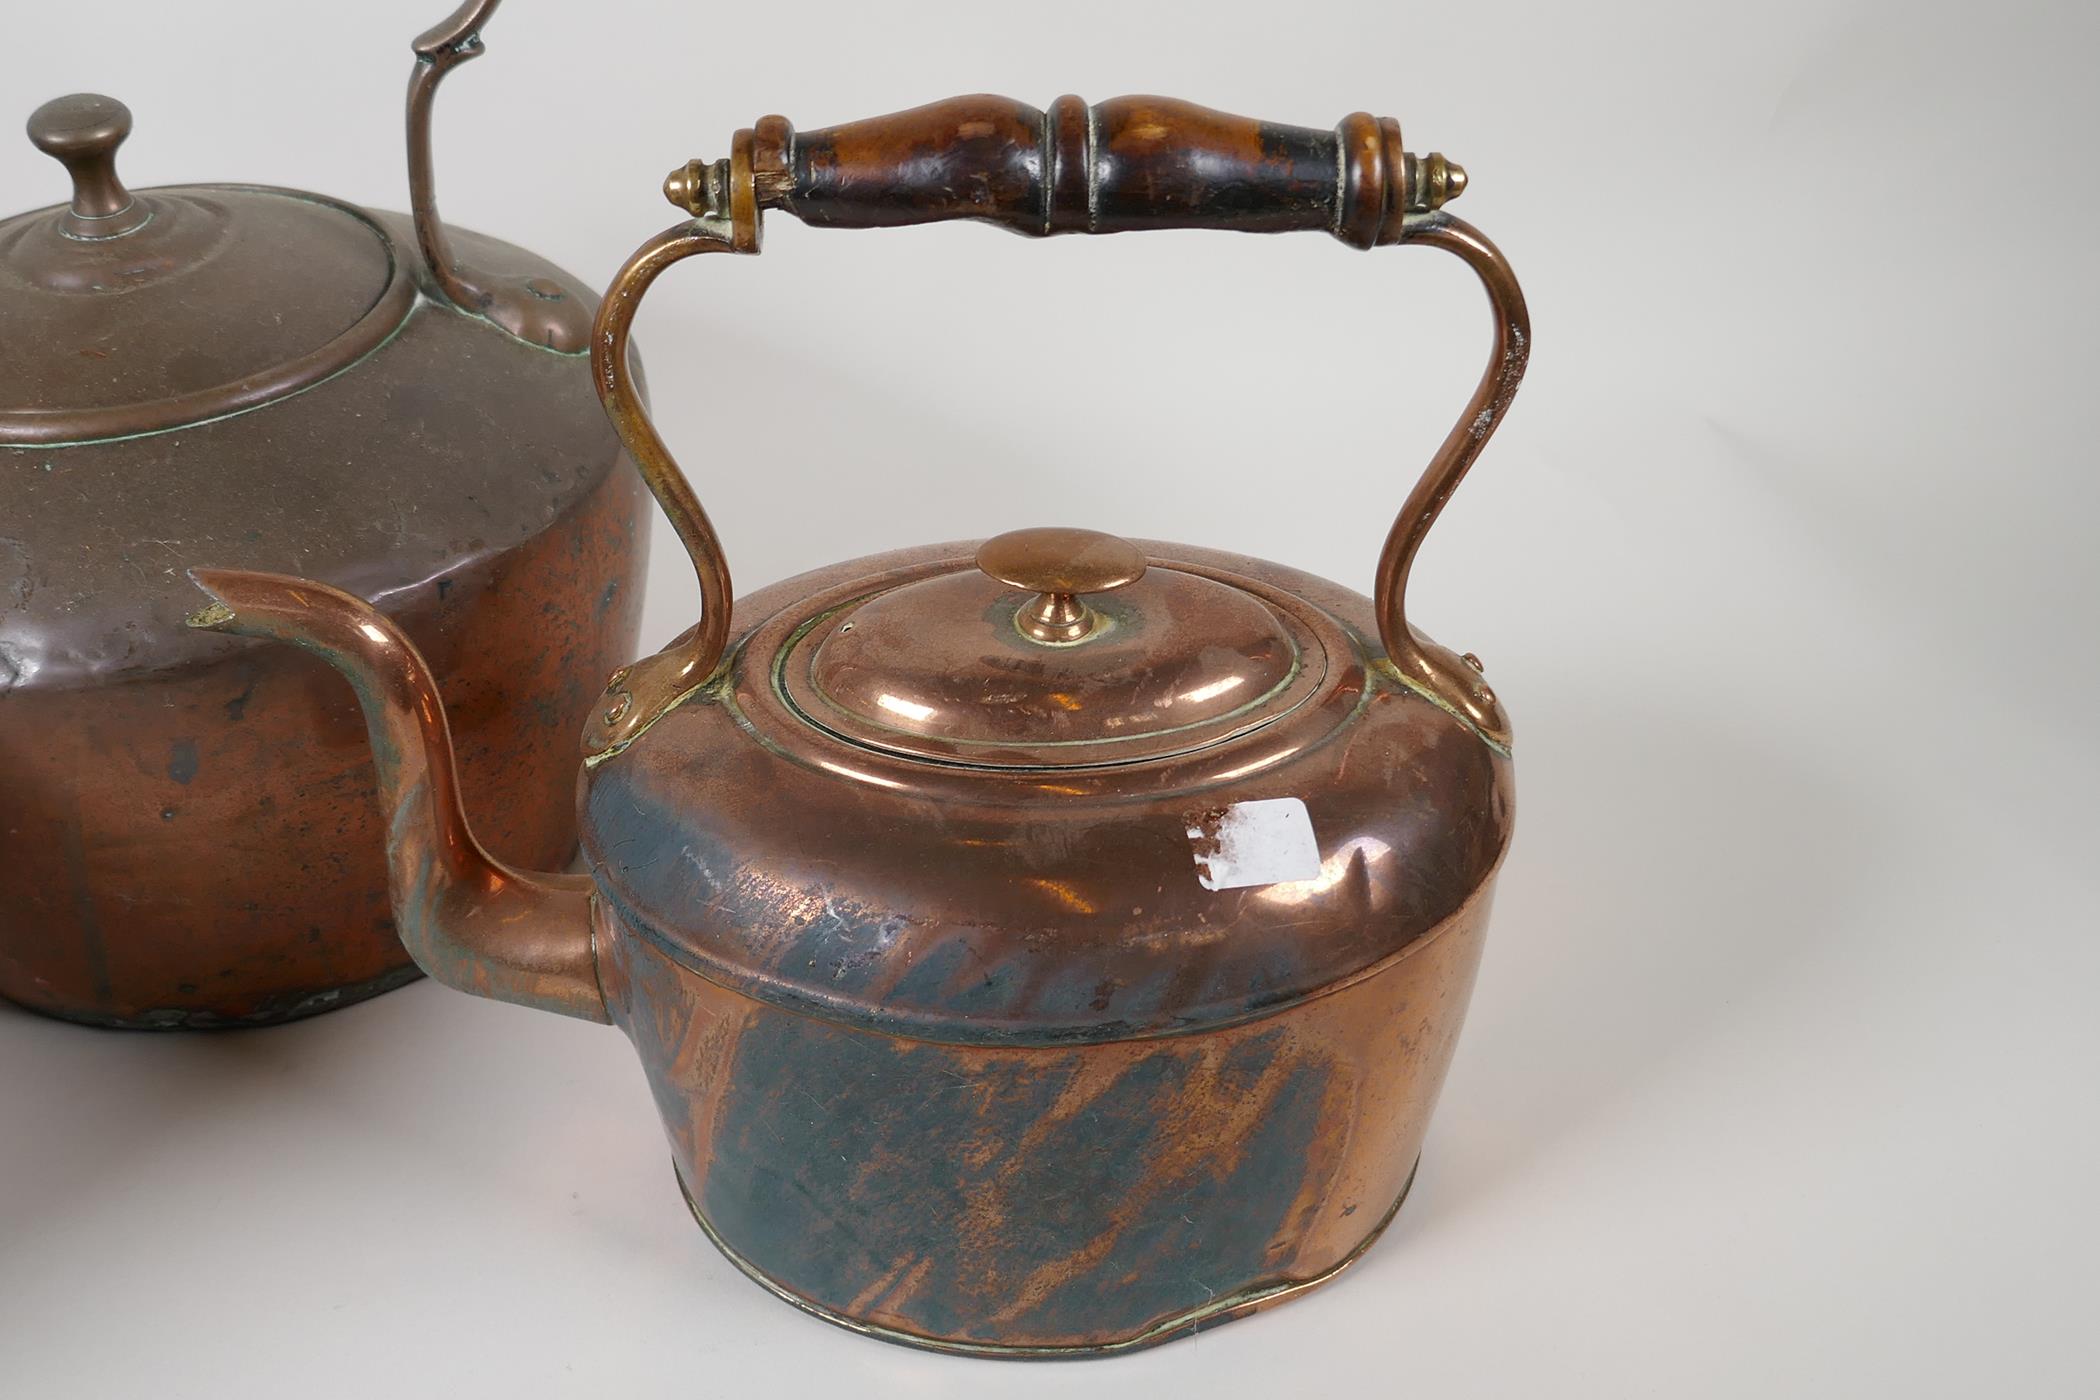 Three C19th copper kettles, largest 12" high - Image 3 of 4